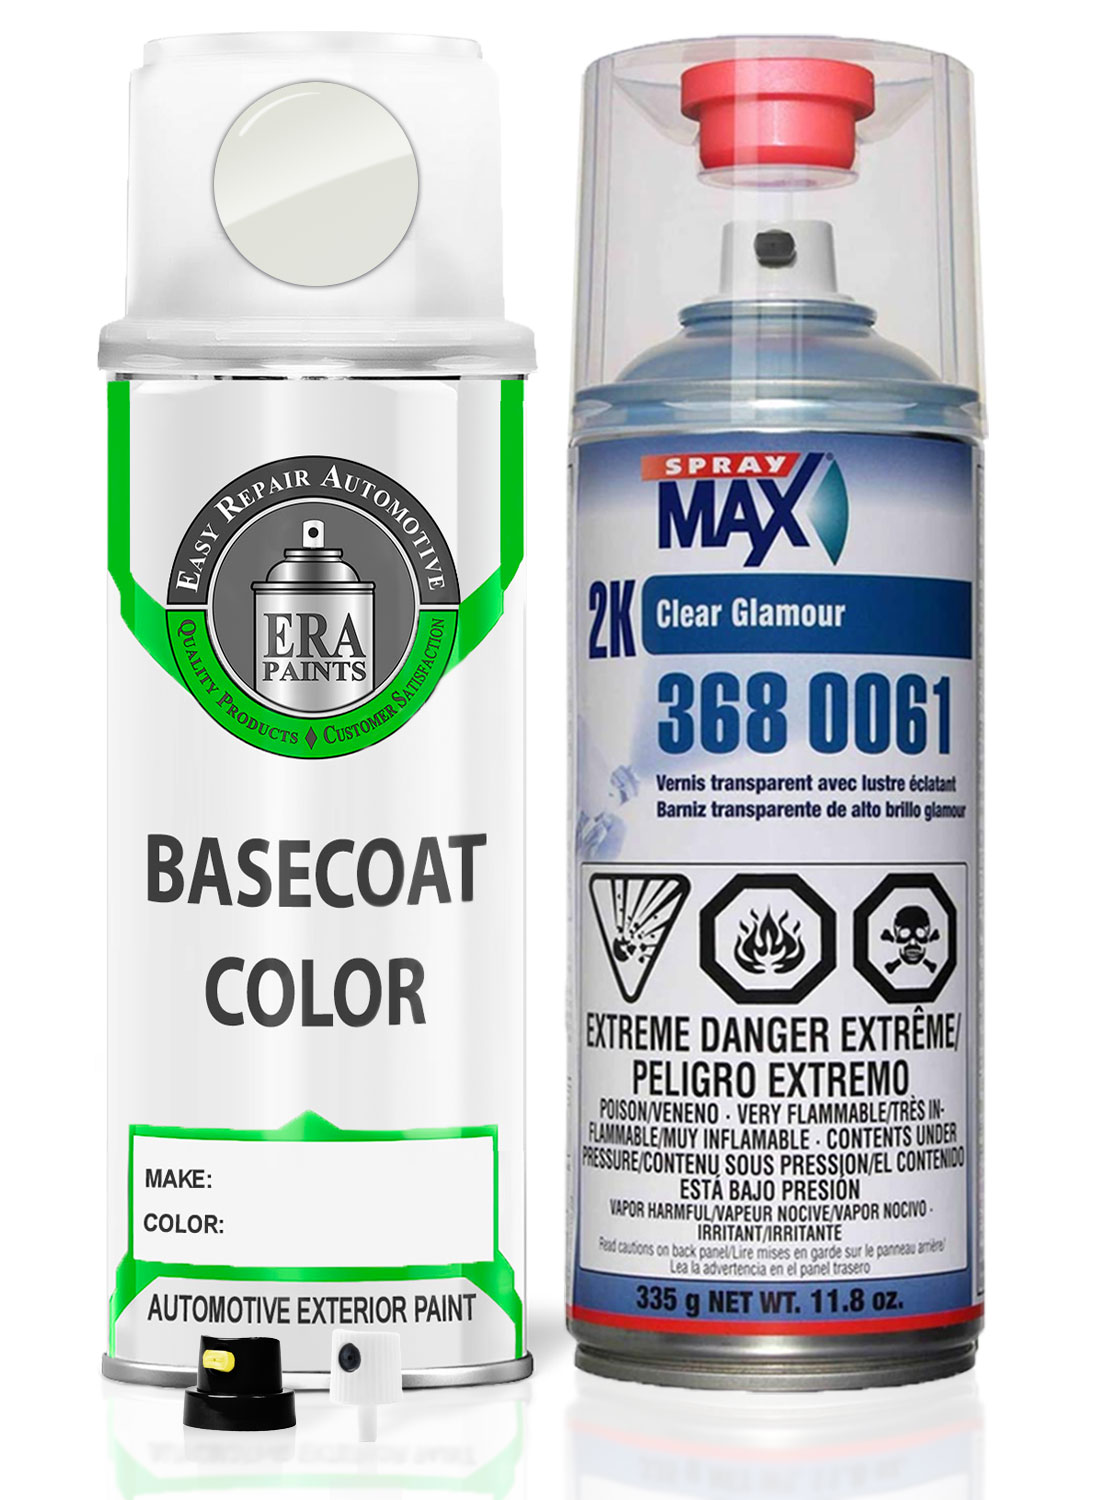 for Hyundai (pkw - Winter White) Exact Match Aerosol Spray Touch Up Paint and SprayMax 2K Clearcoat - Pick Your Color, Size: Spray - Essential Kit w/